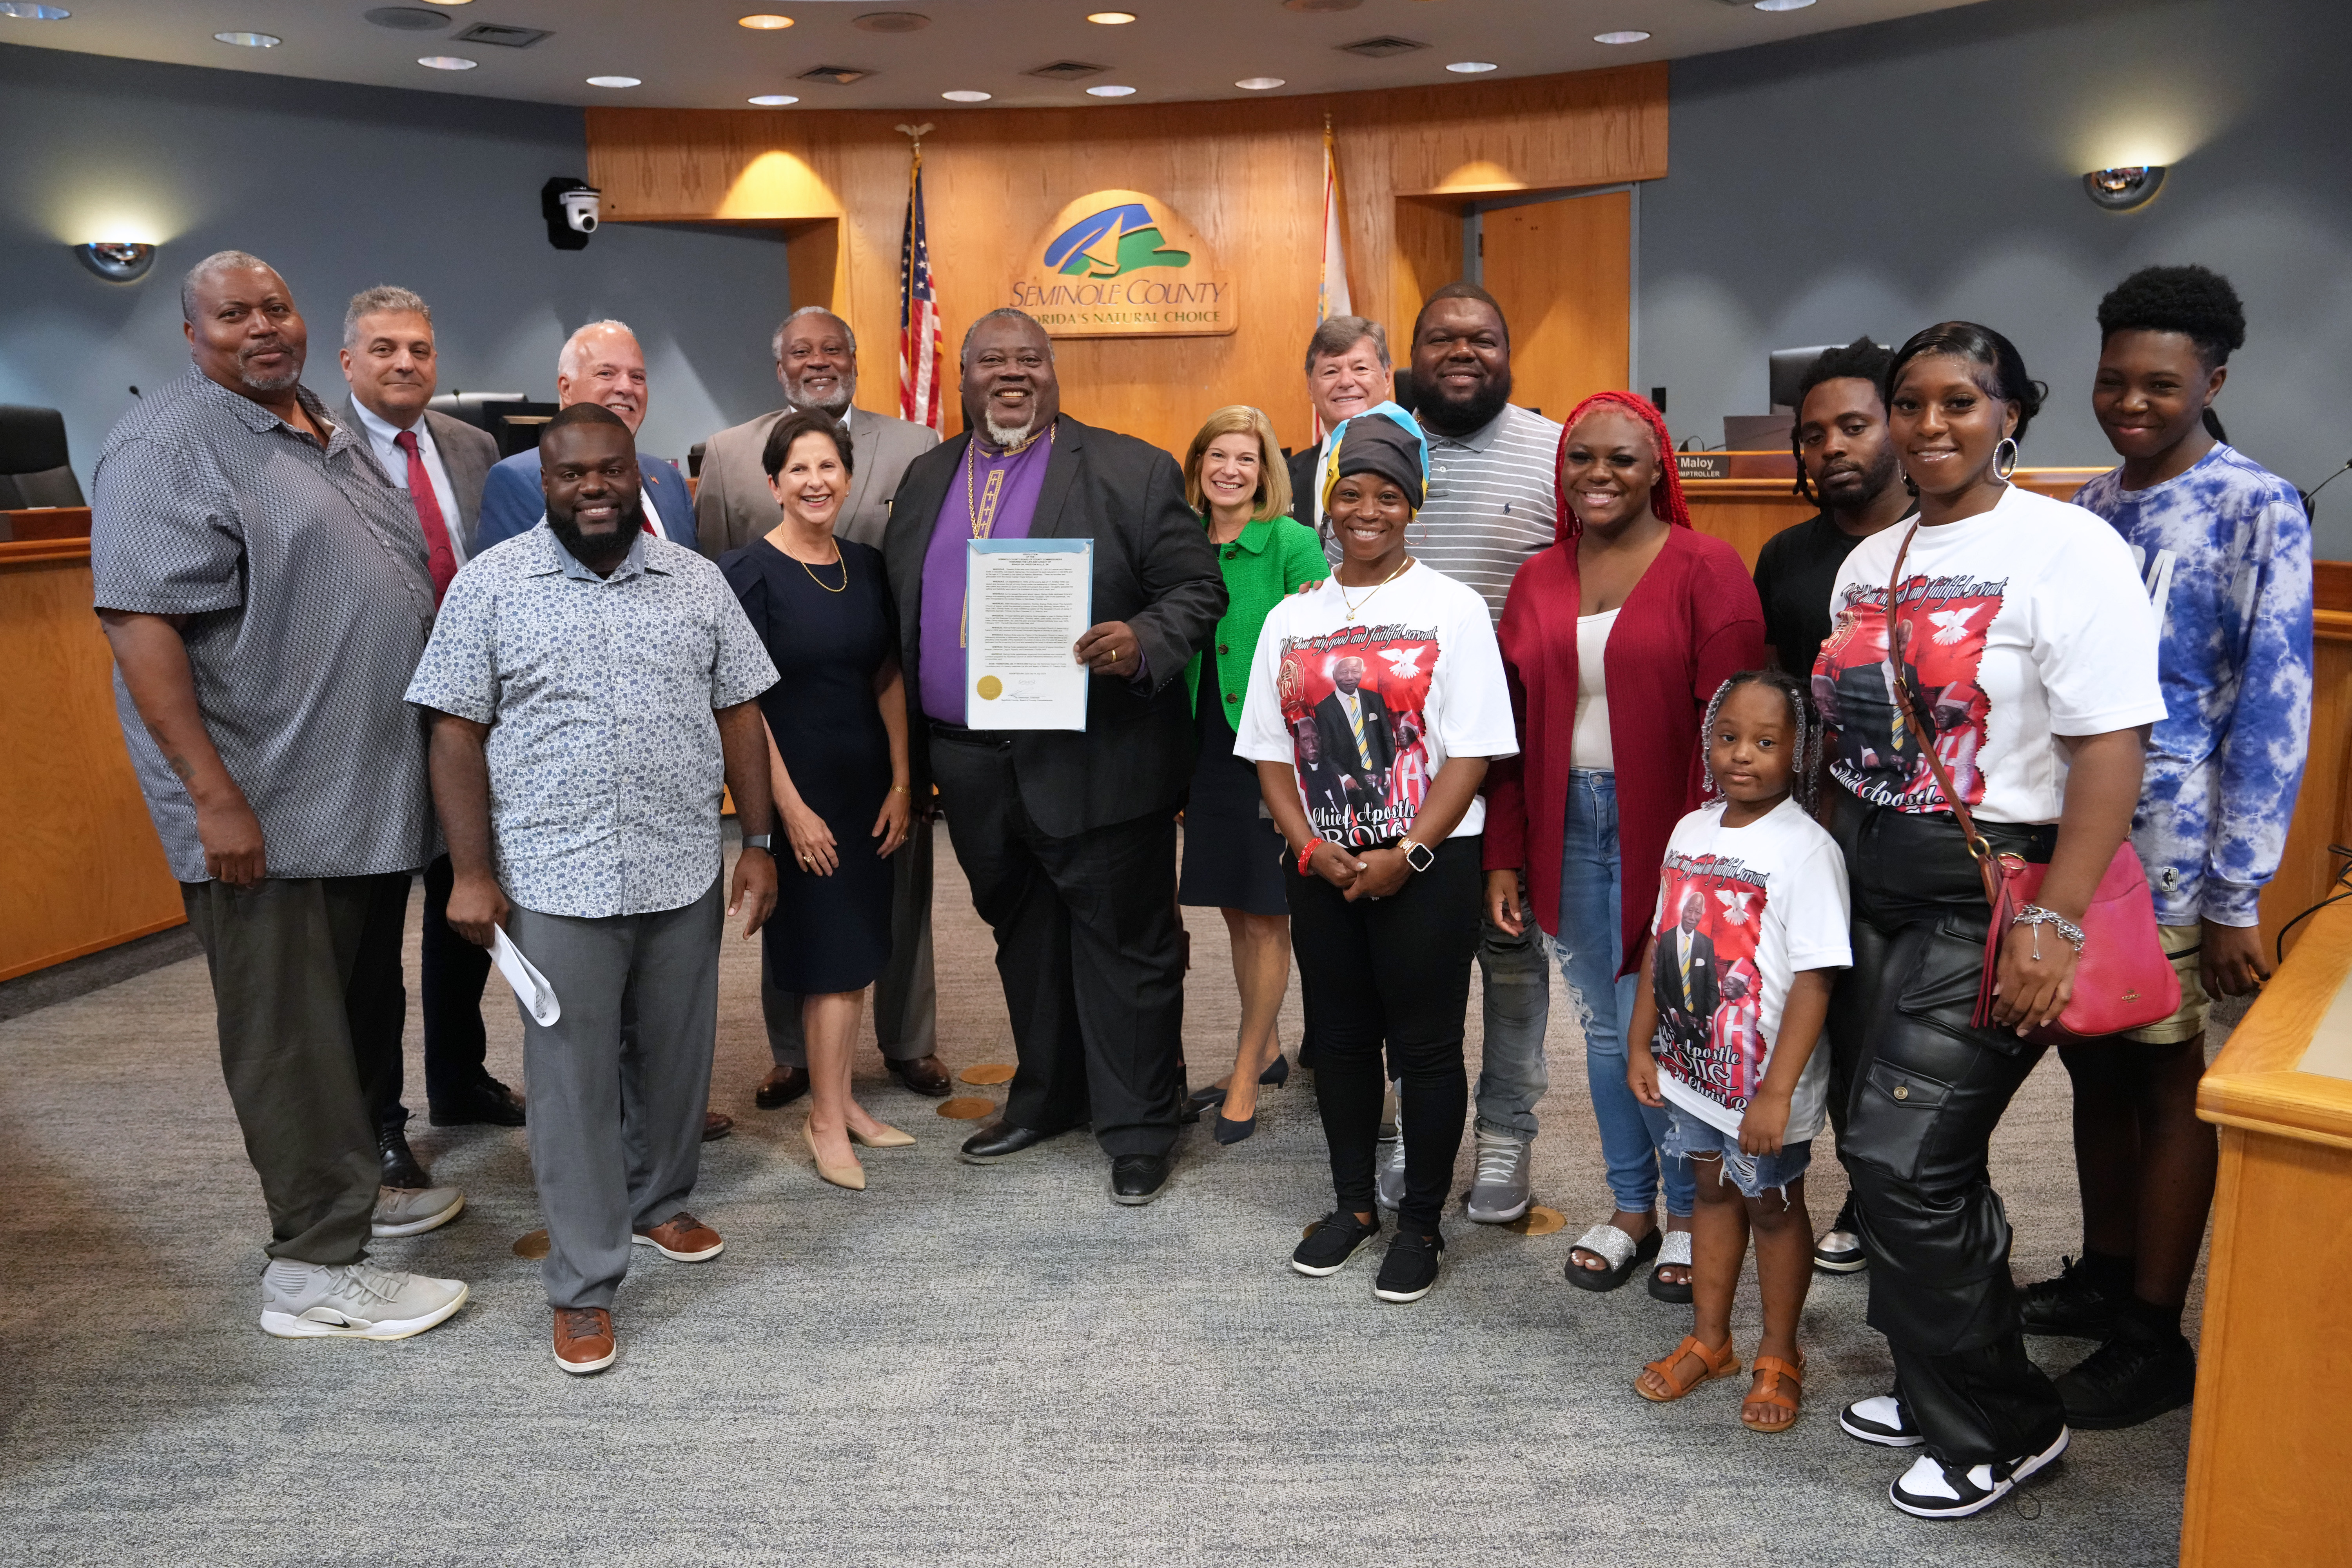 Resolution - Honoring the life and legacy of Bishop Dr. Preston Rolle Sr. Countywide (Meloney Koontz, Assistant County Manager)